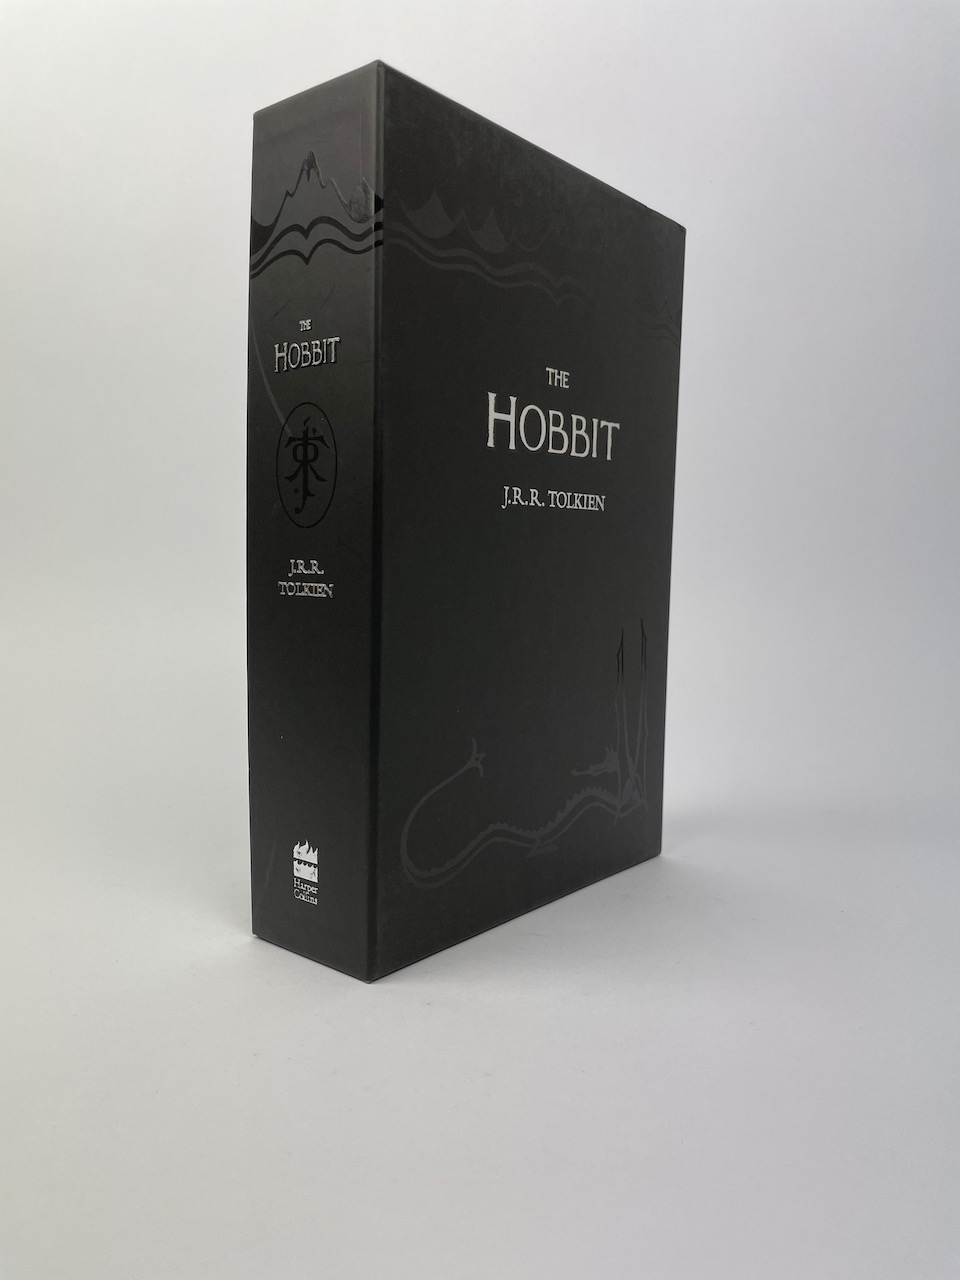 
The Hobbit, Limited Edition Collectors' Box 2